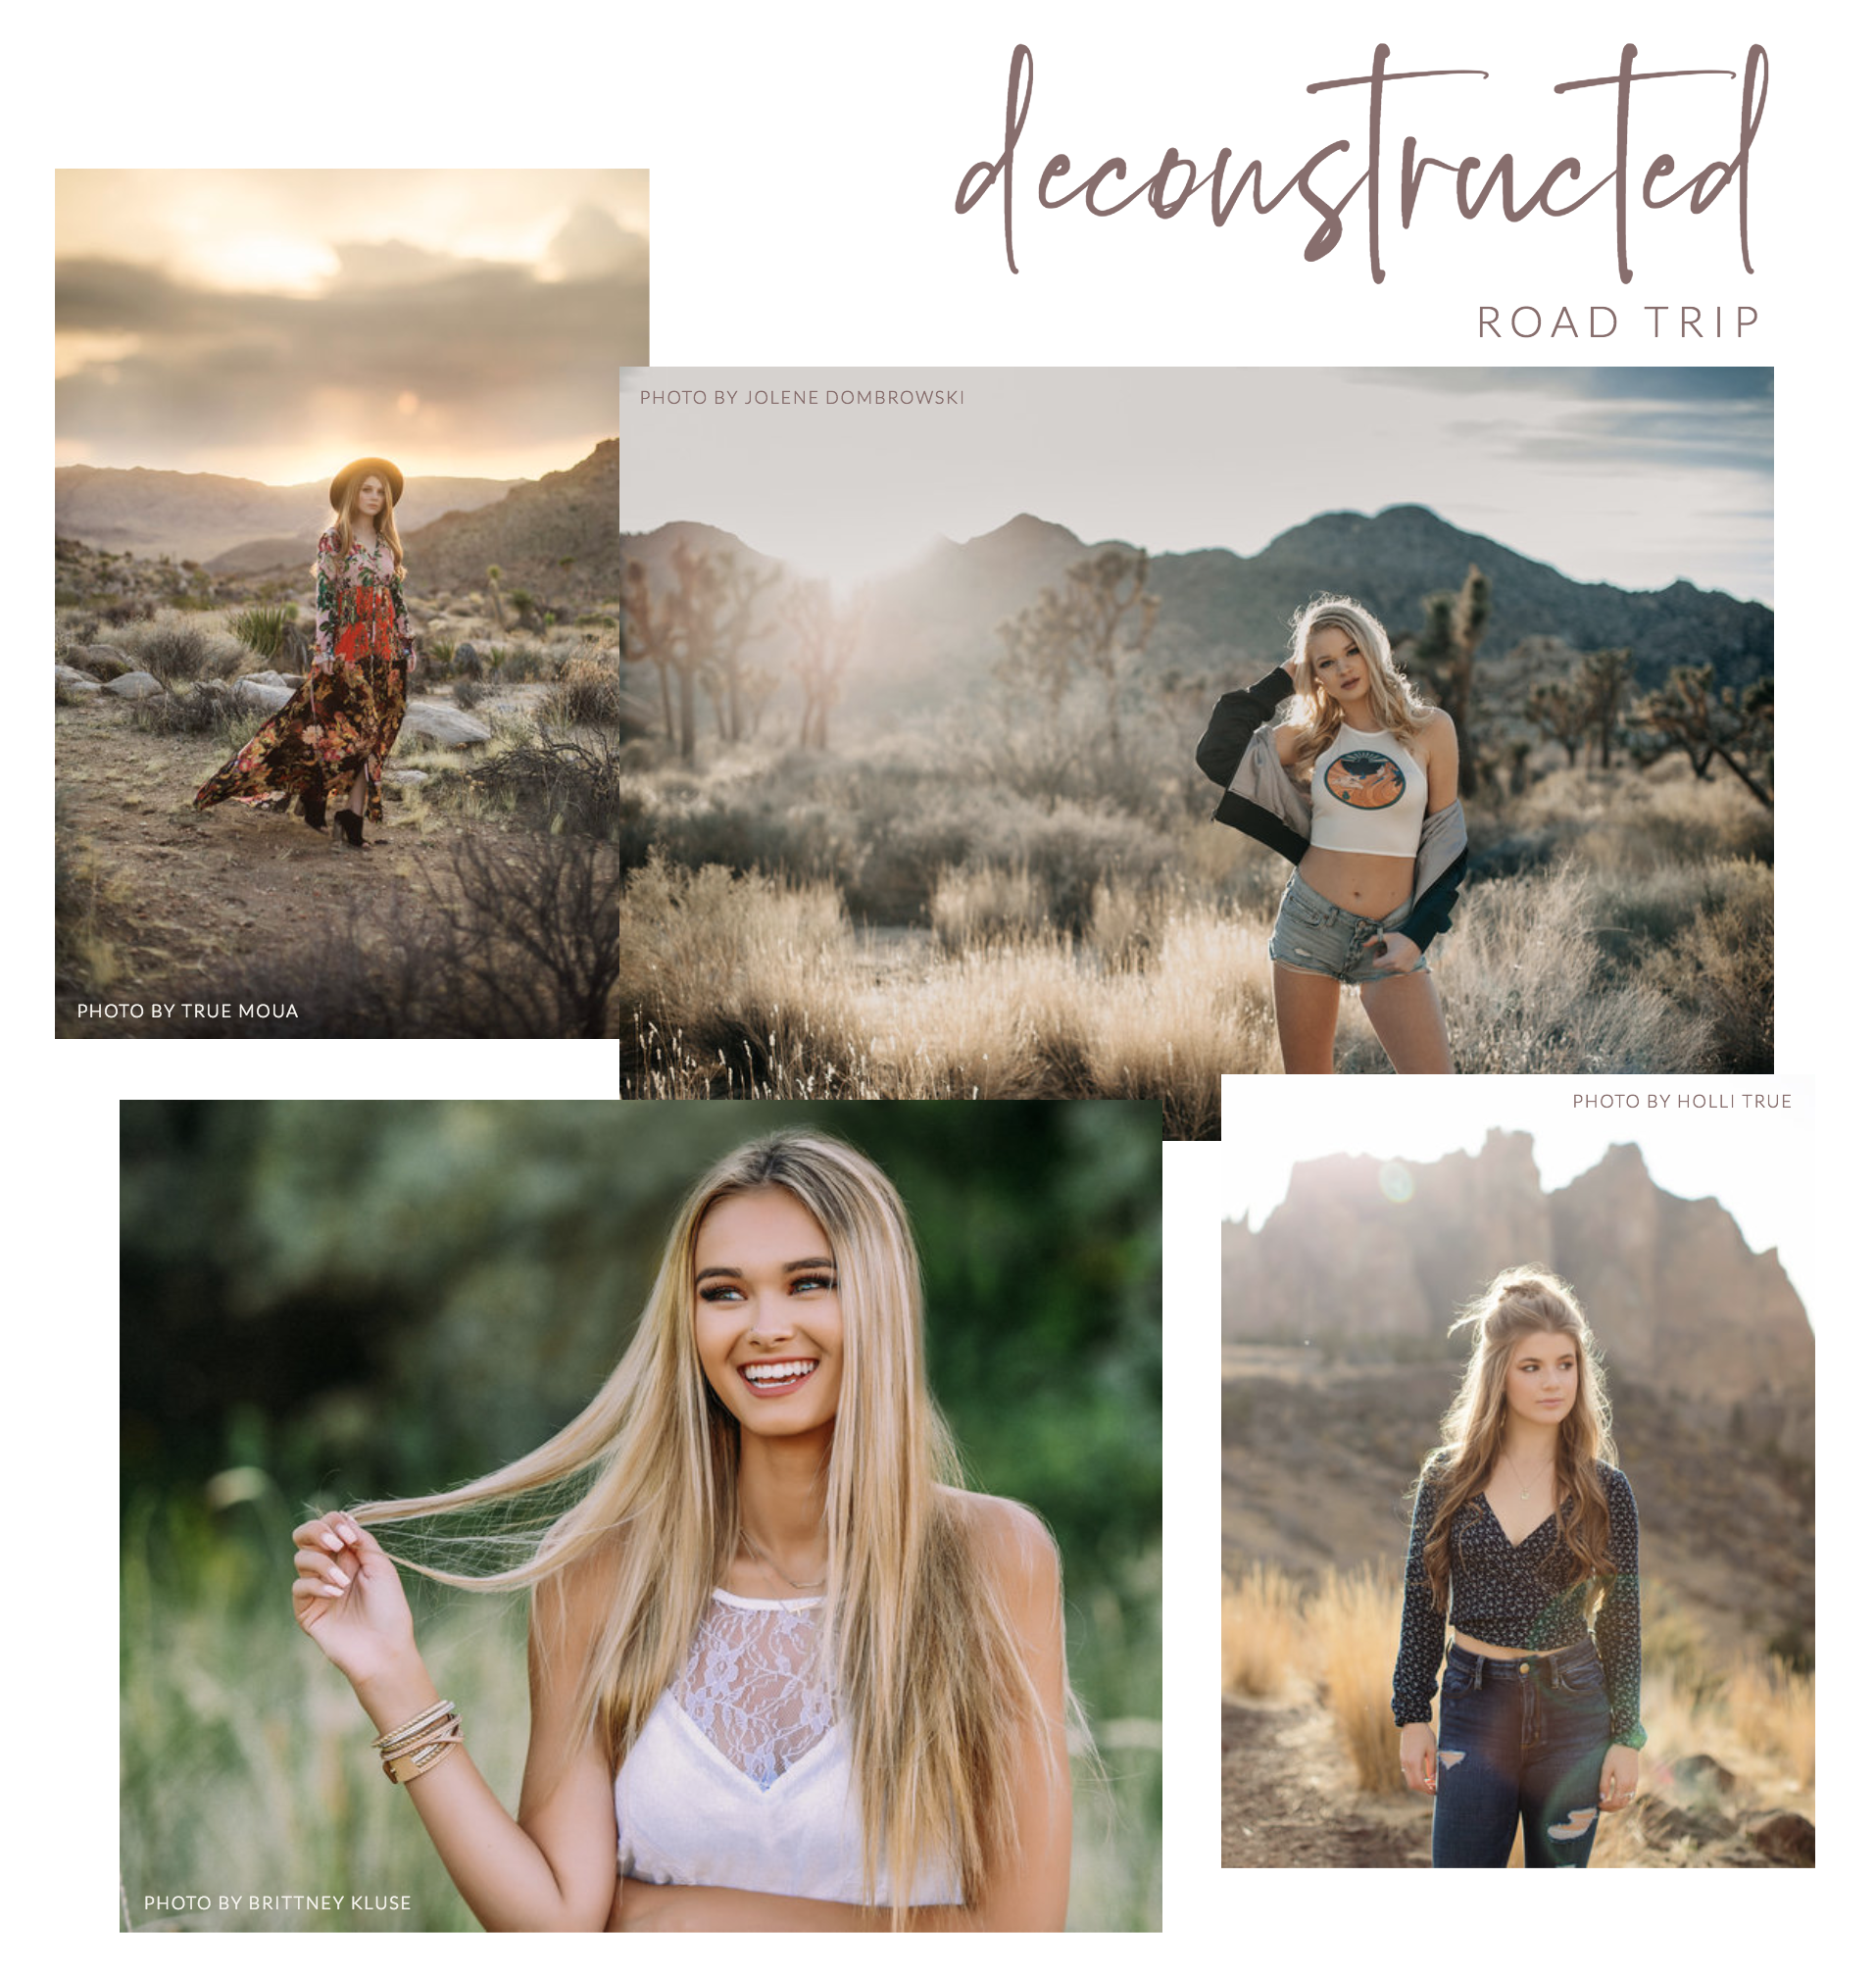 Deconstructed Road Trip 2019 WPPI Shootout with True Moua, Brittney Kluse, Jolene Dombrowski & Holli True in Las Vegas this February